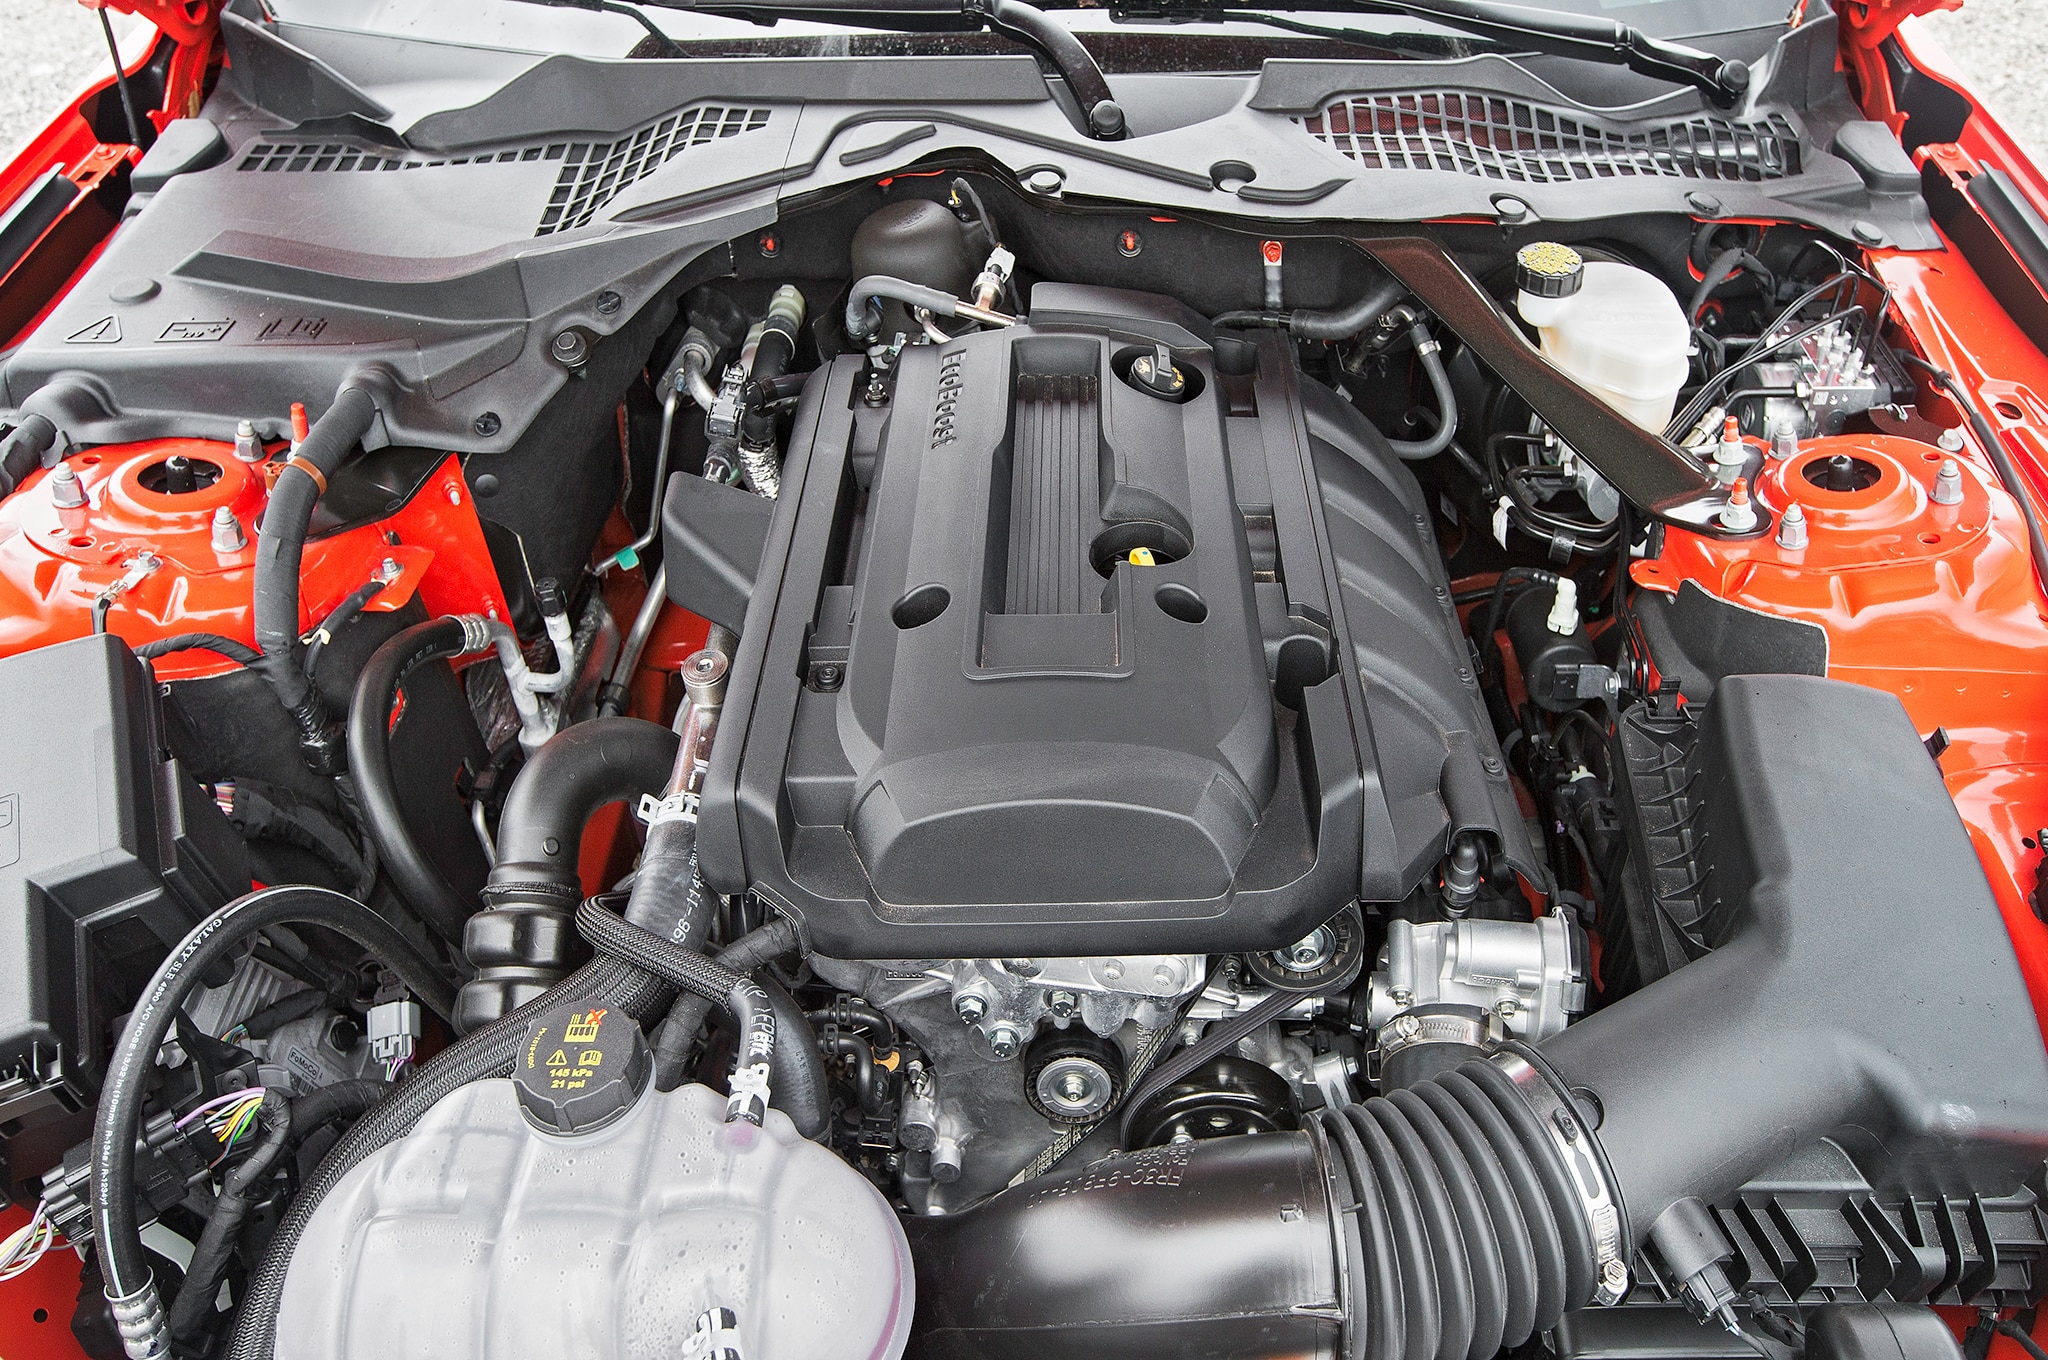 2018 Ford Mustang engine